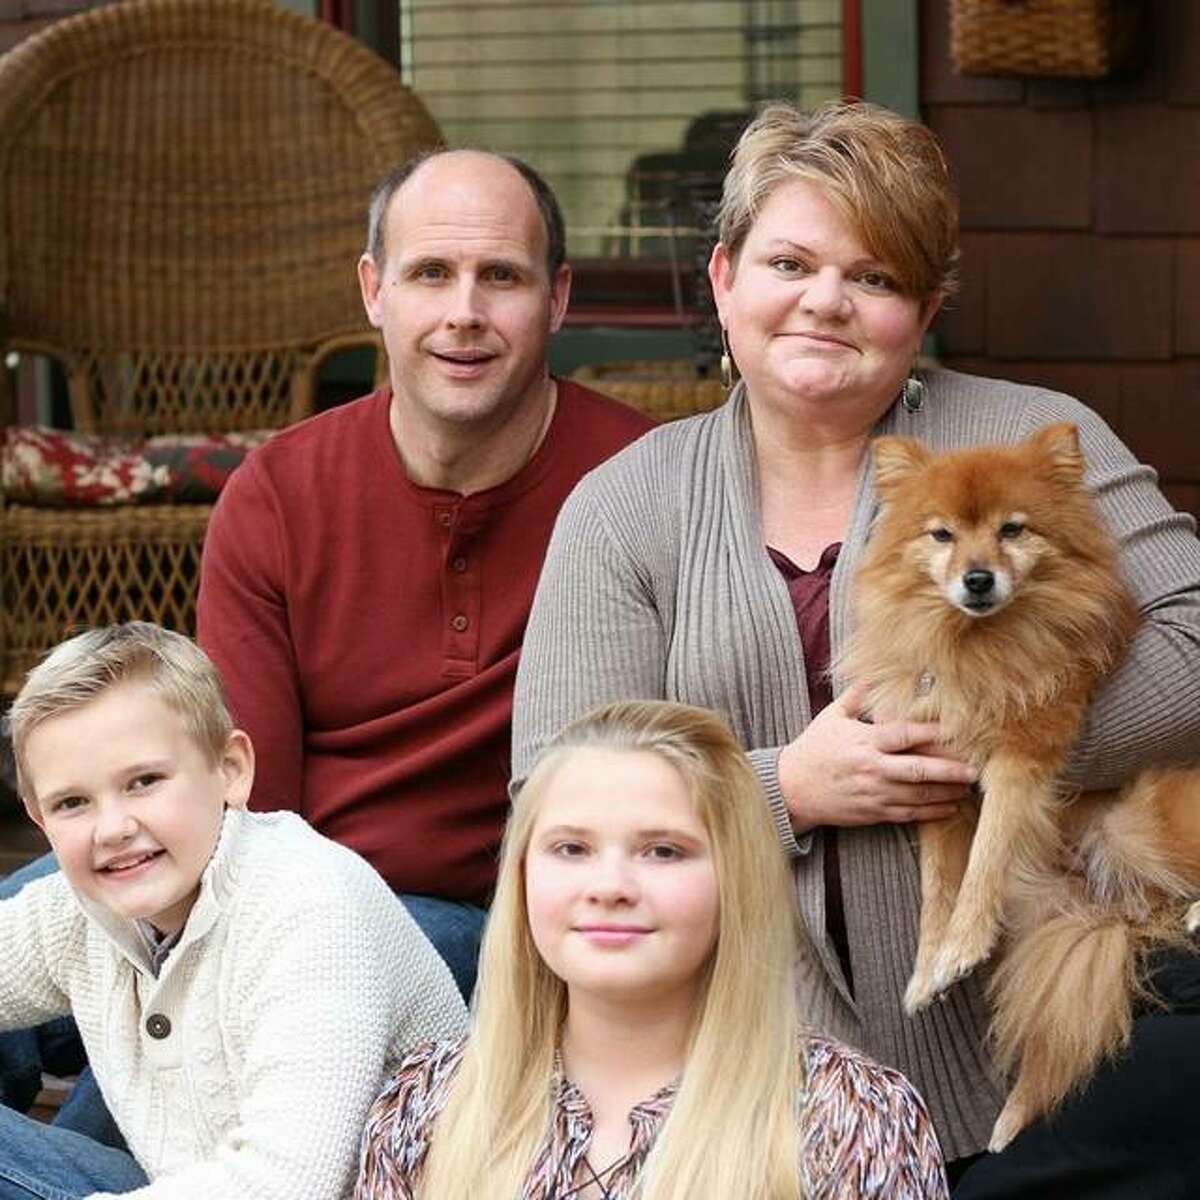 Brian Hanson with his wife, Amy, son Ben and daughter Haley, plus their dog Chewie.